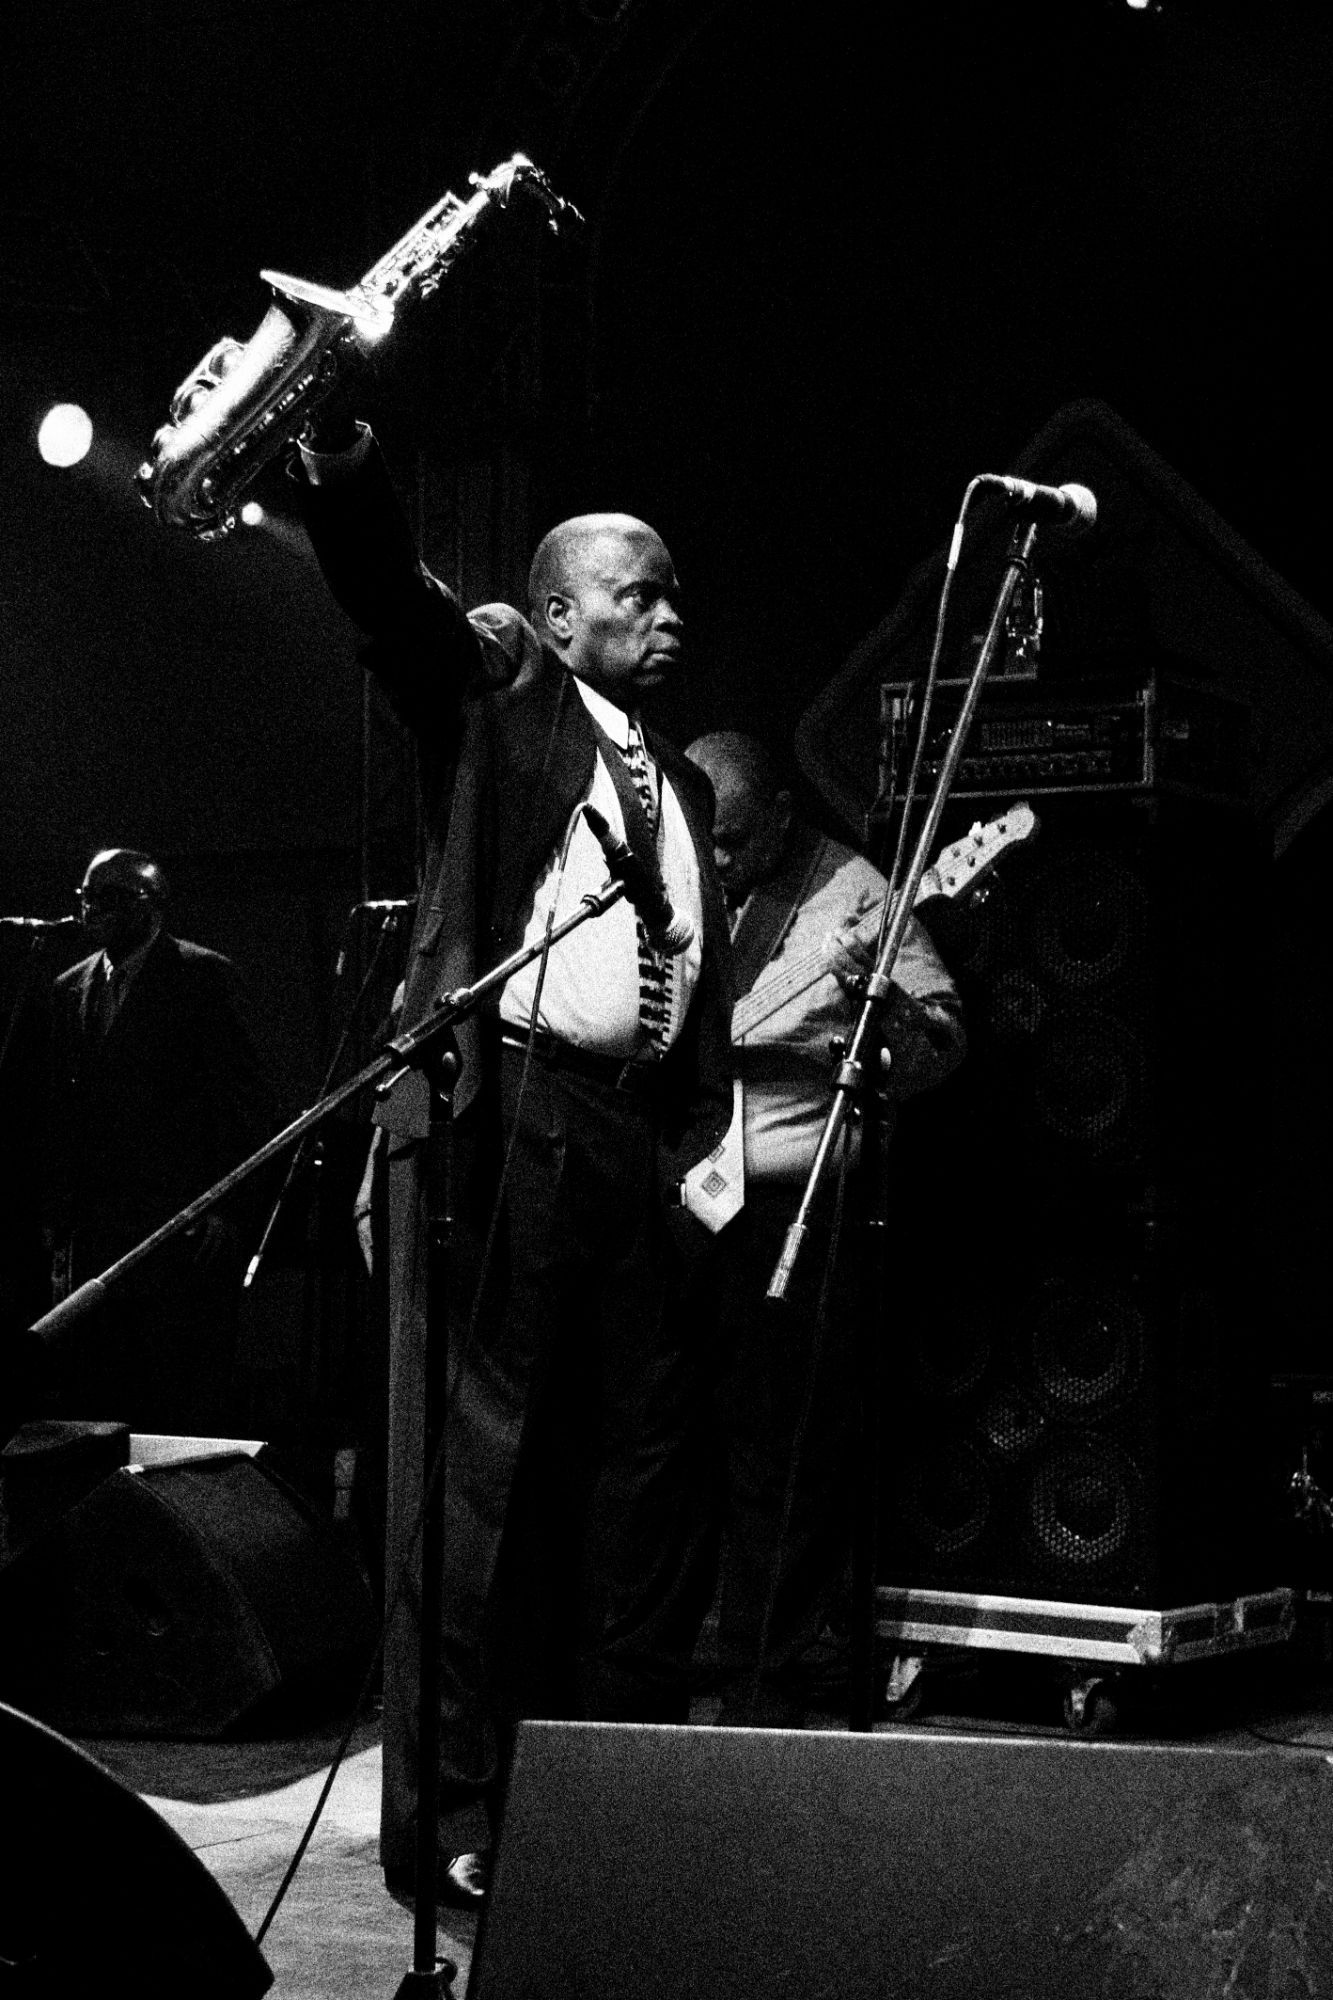 Black and white photo of Maceo Parker performing live at Sziget festival